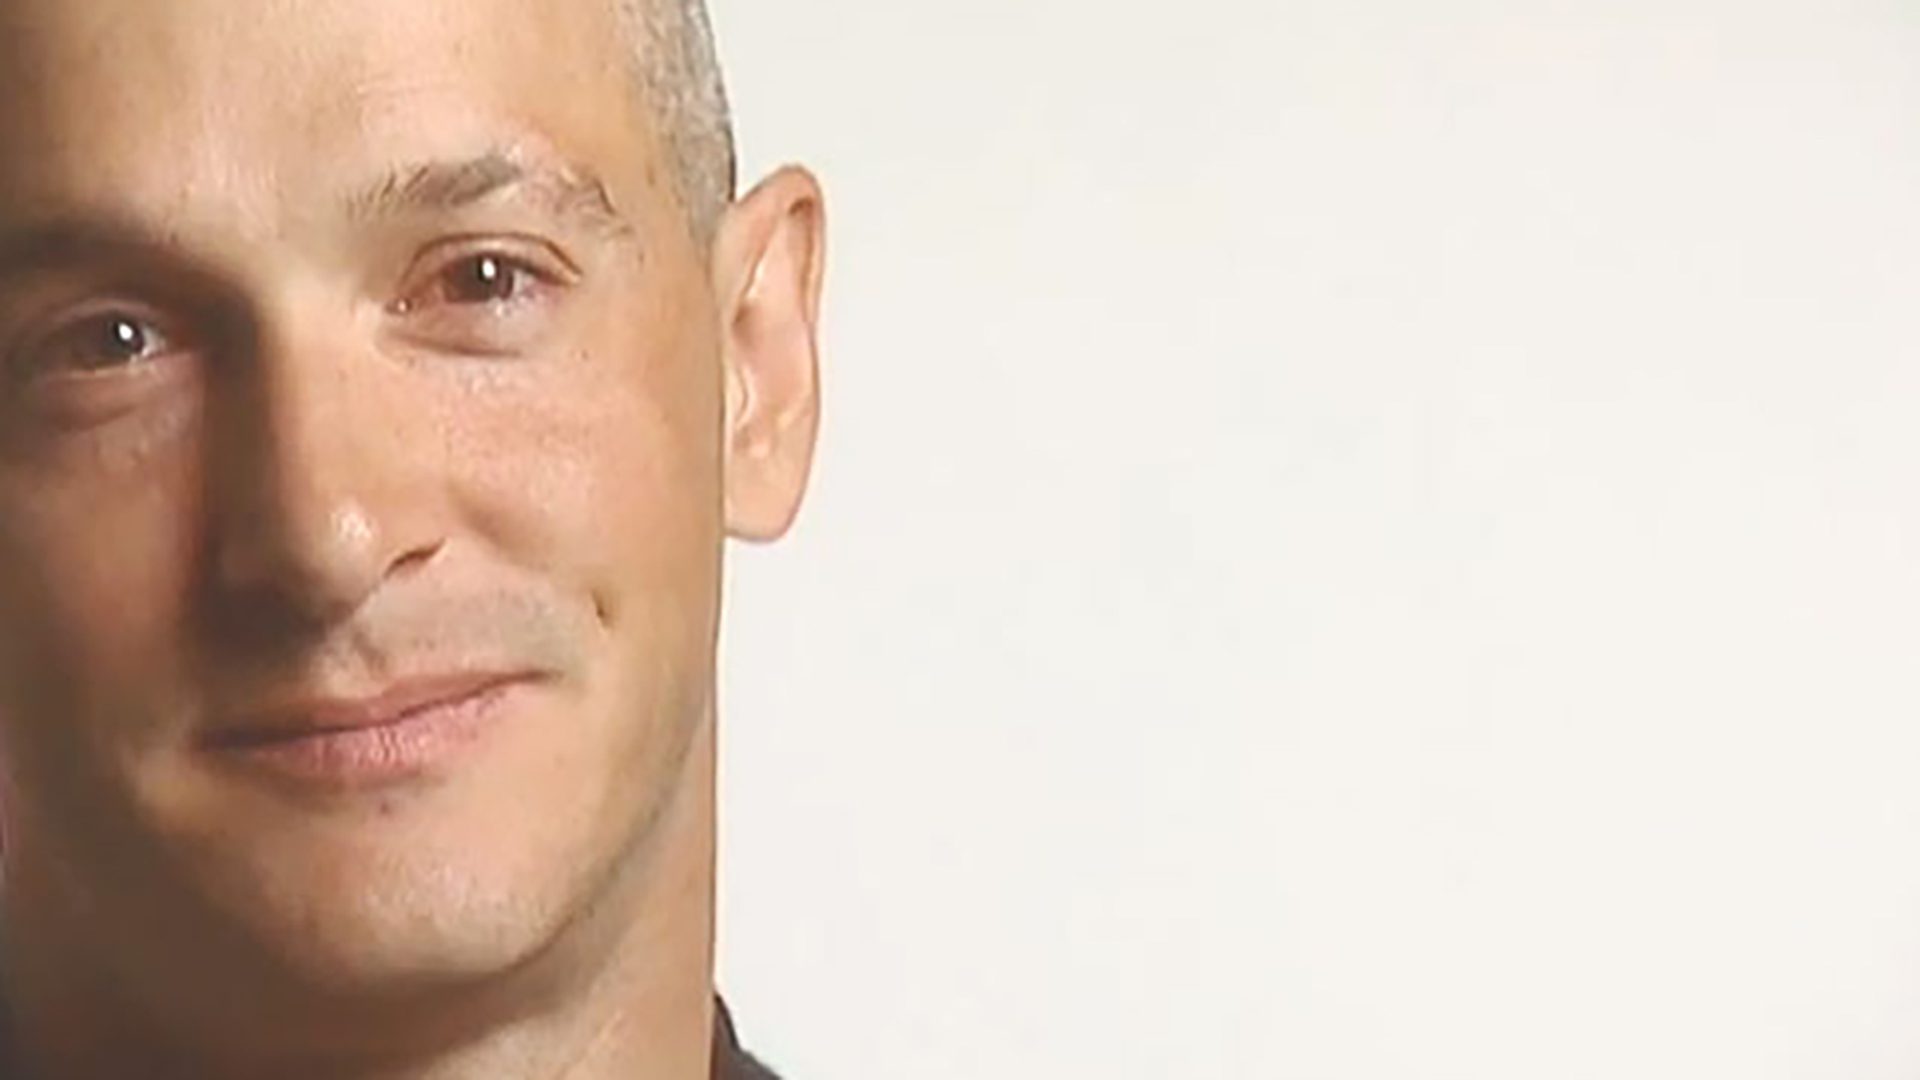 A close-up portrait of a man with a buzz cut hairstyle against a white background